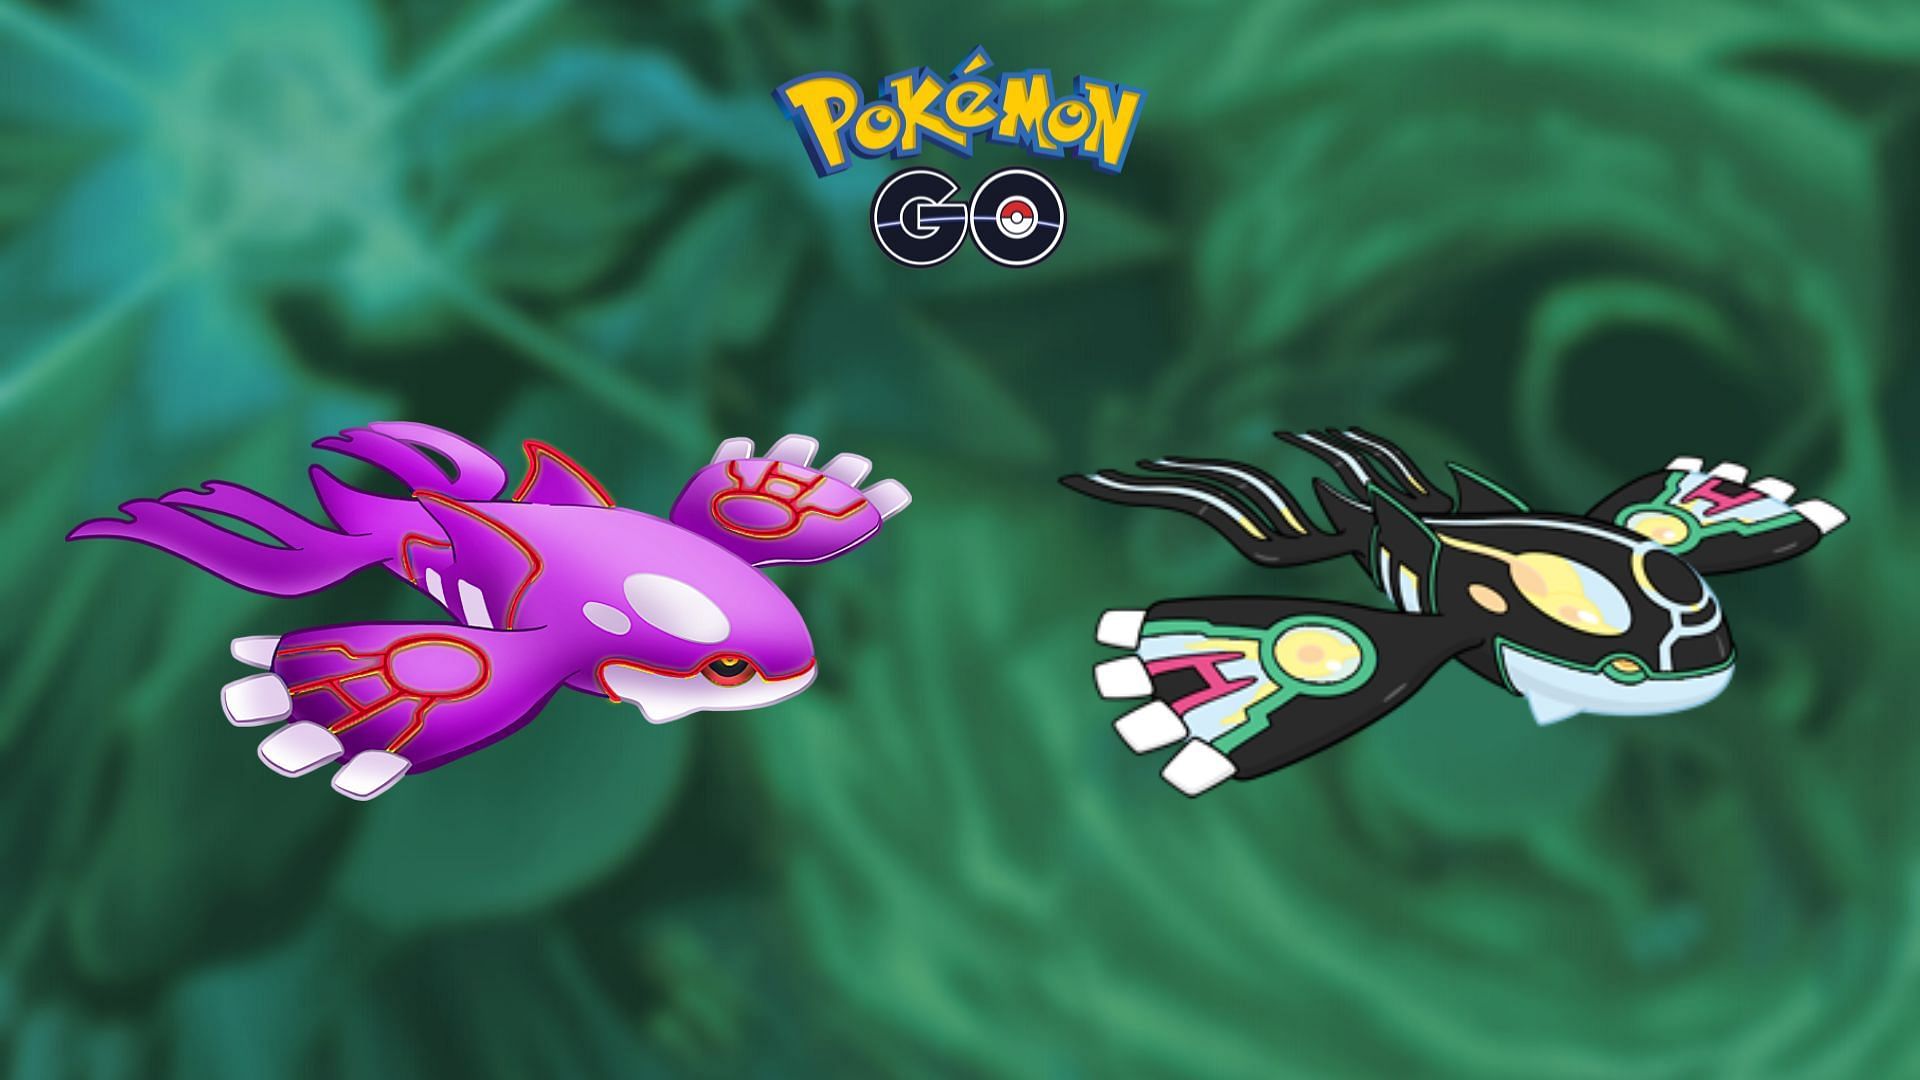 Shiny Kyogre and Shiny Primal Kyogre as seen in the game (Image via Sportskeeda)